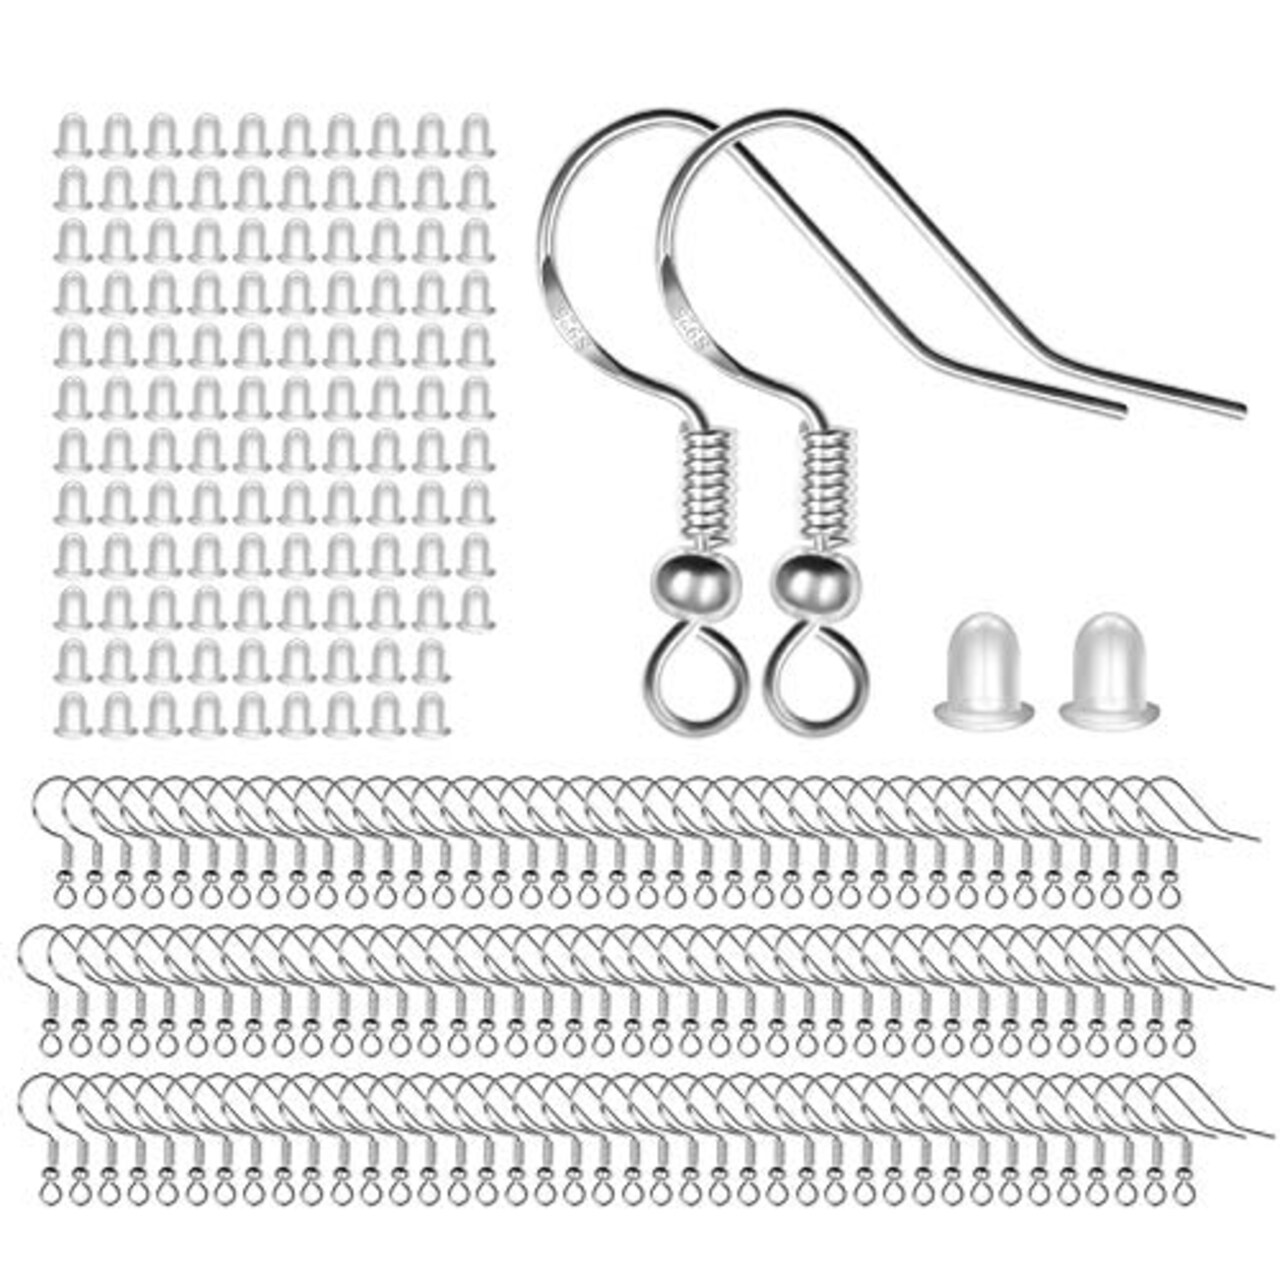 925 Sterling Silver Earring Hooks 120 PCS/60 Pairs, Ear Wires Fish Hooks,  Hypo-allergenic Jewelry Findings Parts with 120 PCS Clear Silicone Earring  Backs